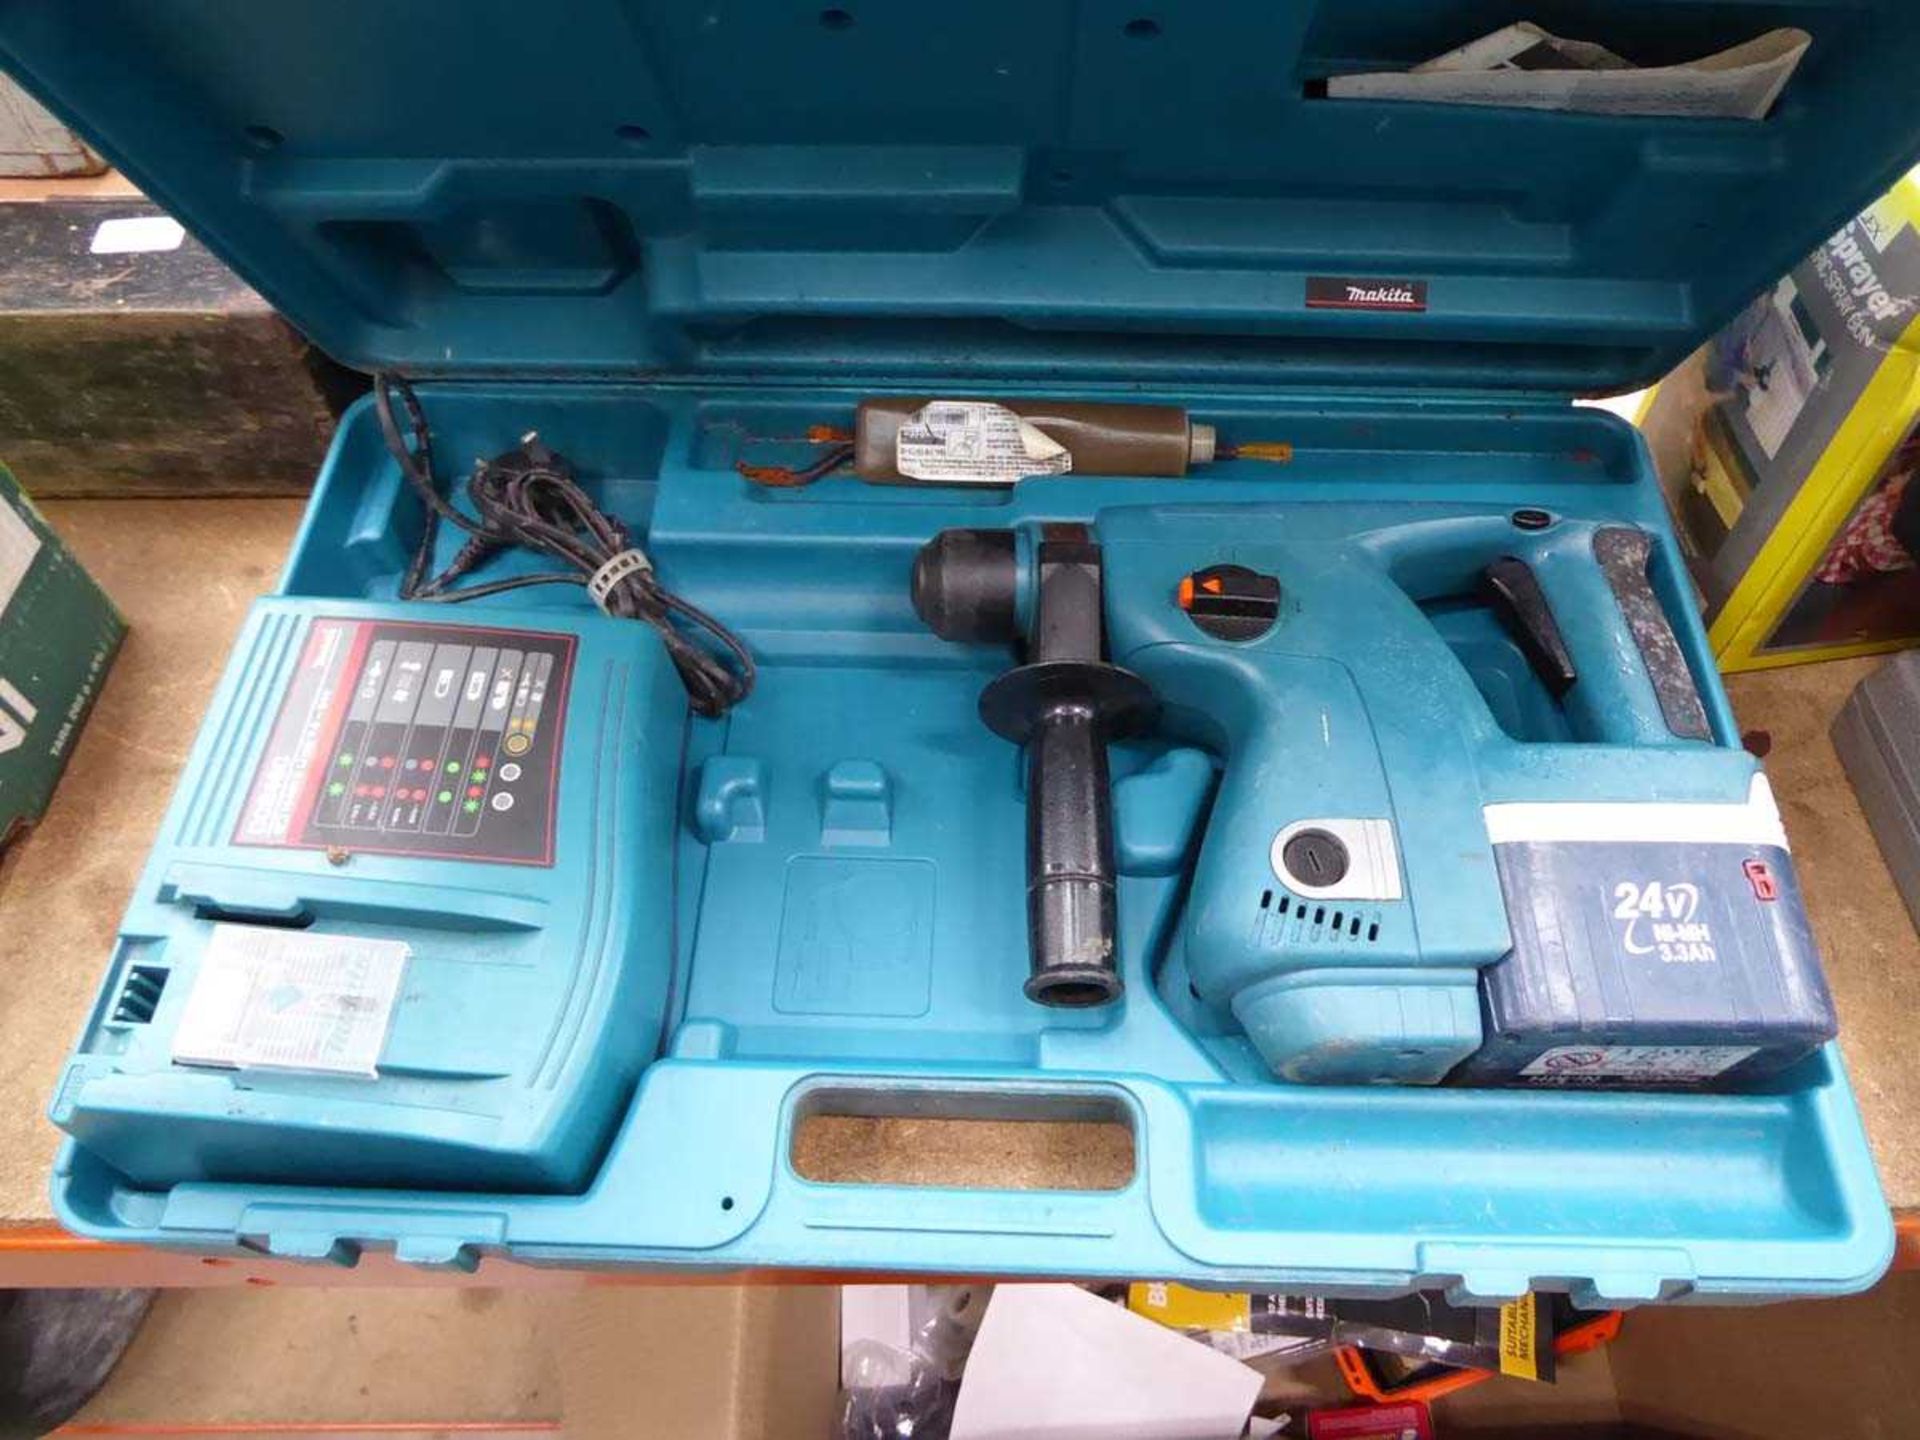 Makita 24V STS drill with one battery and one charger